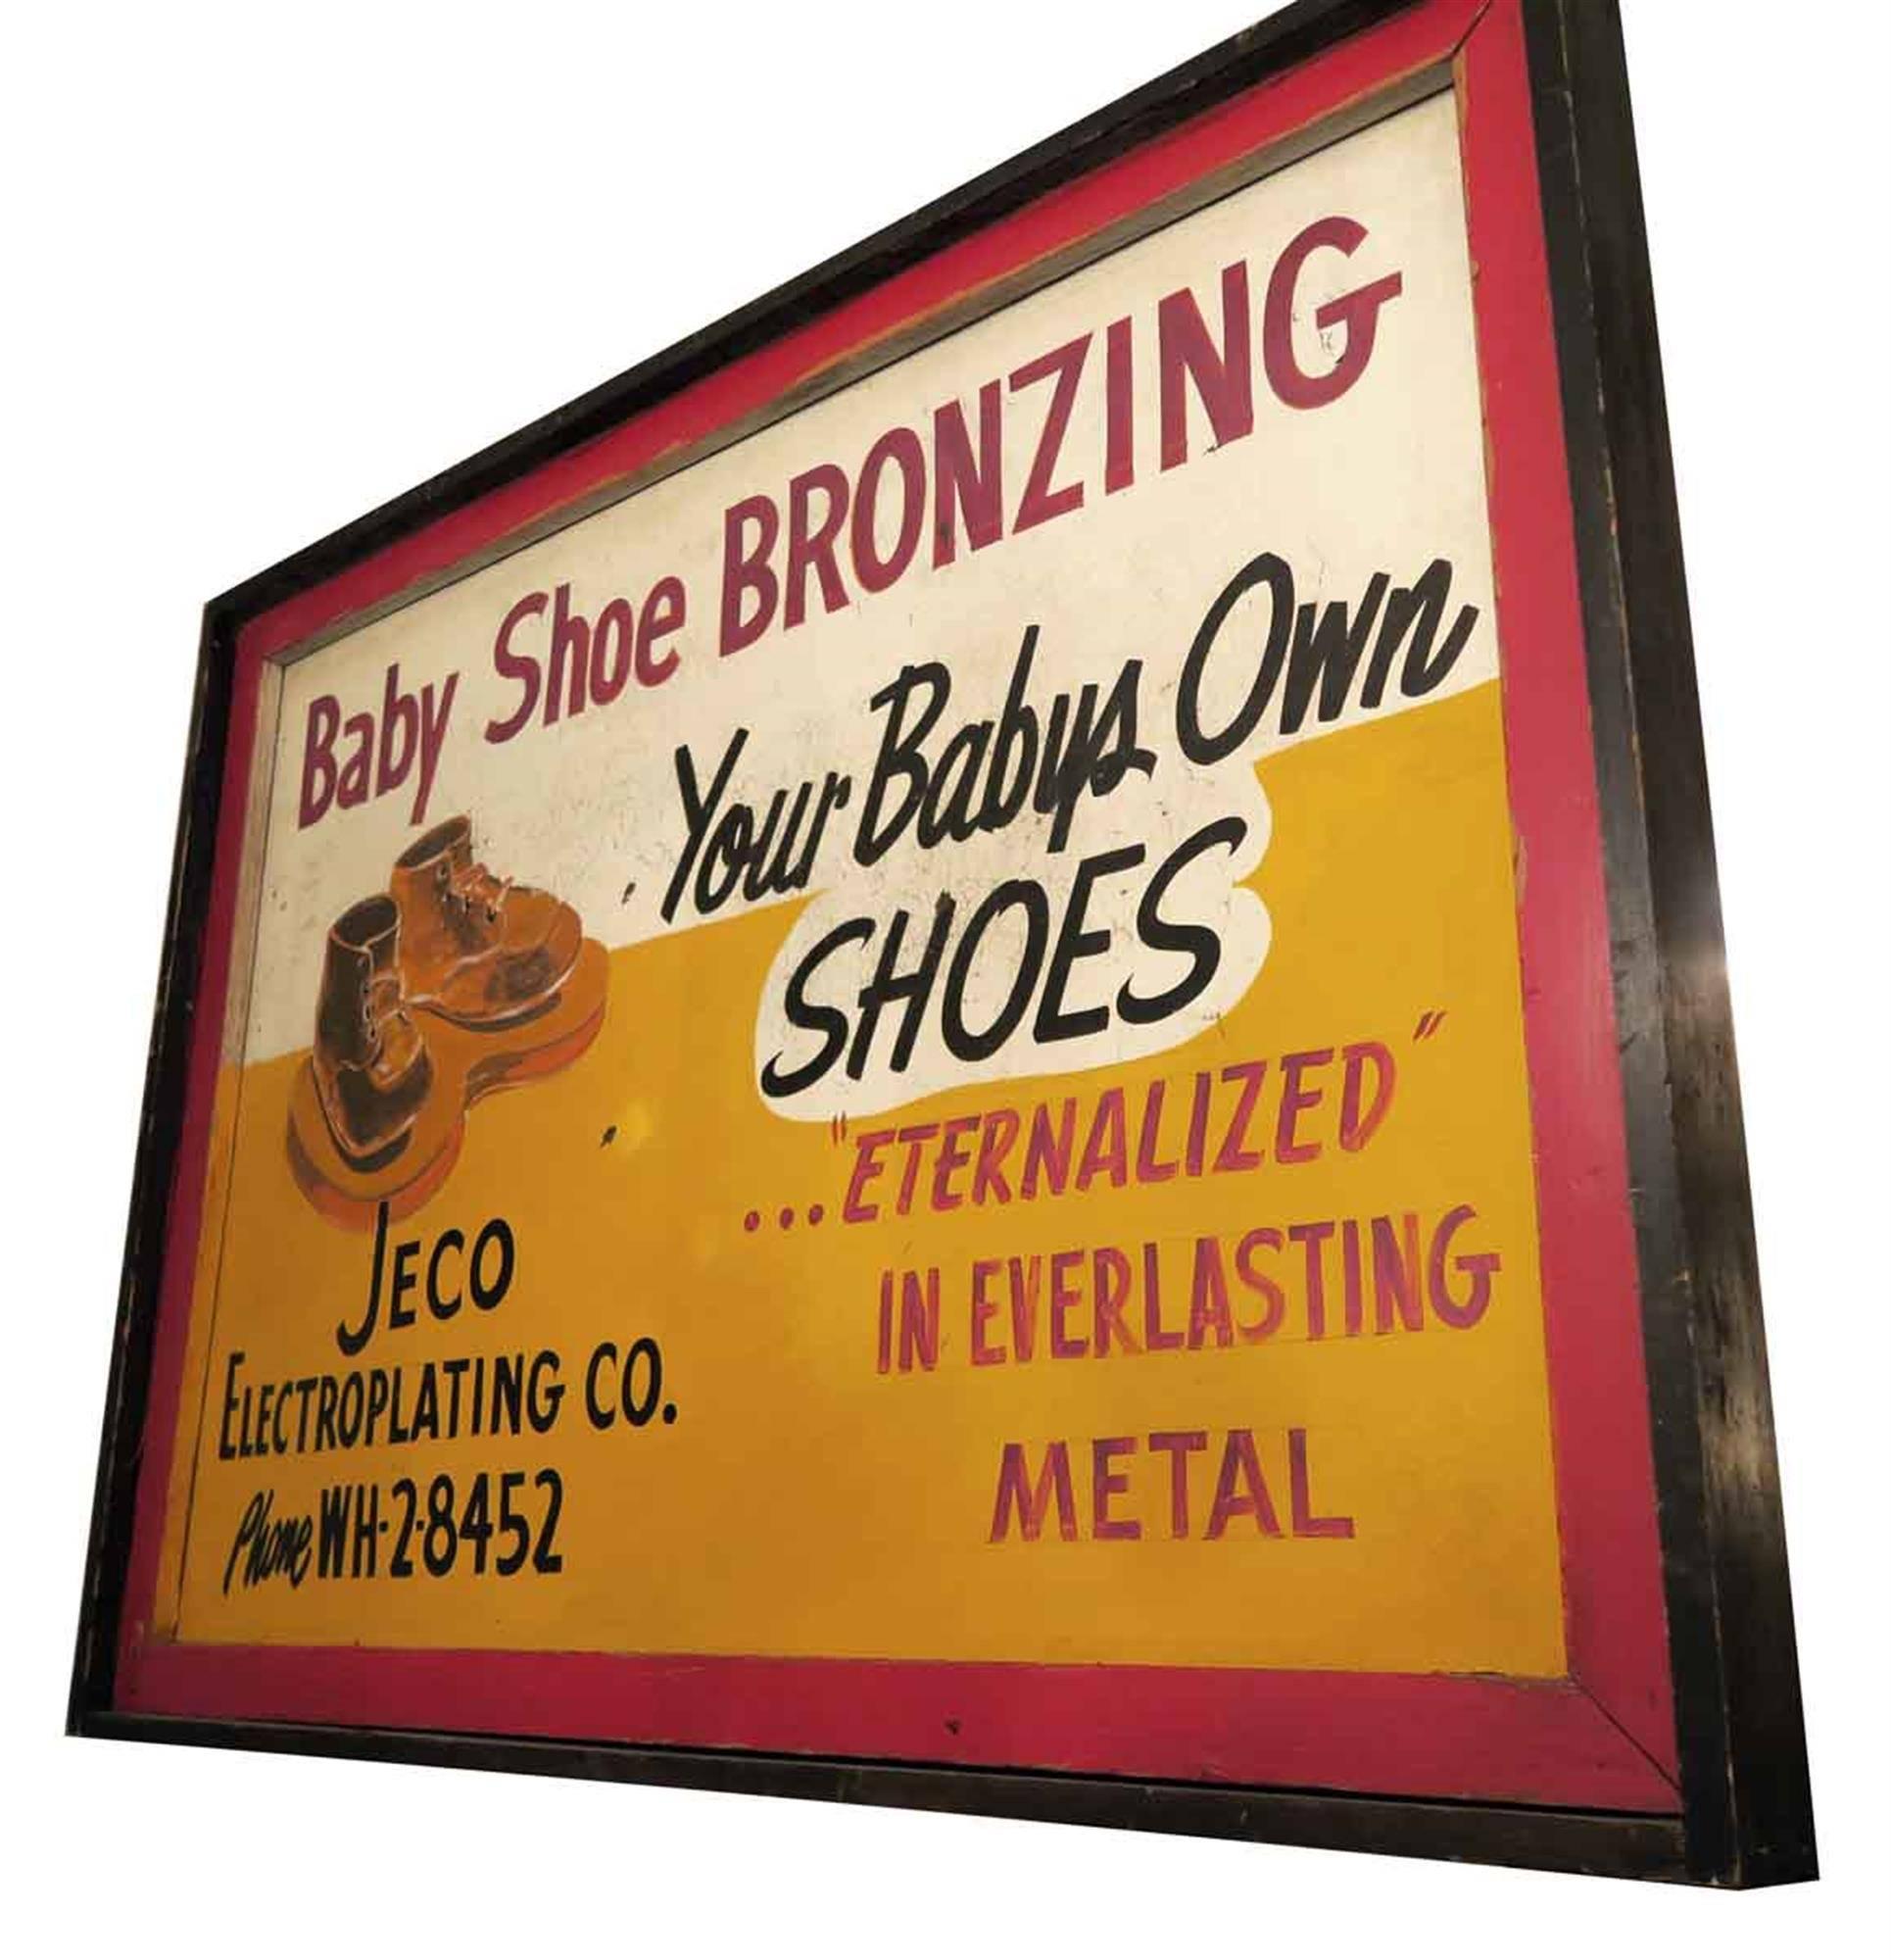 1940s wooden framed orange, red, white and black double sided Baby Shoe Bronzing sign. This can be seen at our 1800 South Grand Ave location in Downtown LA.